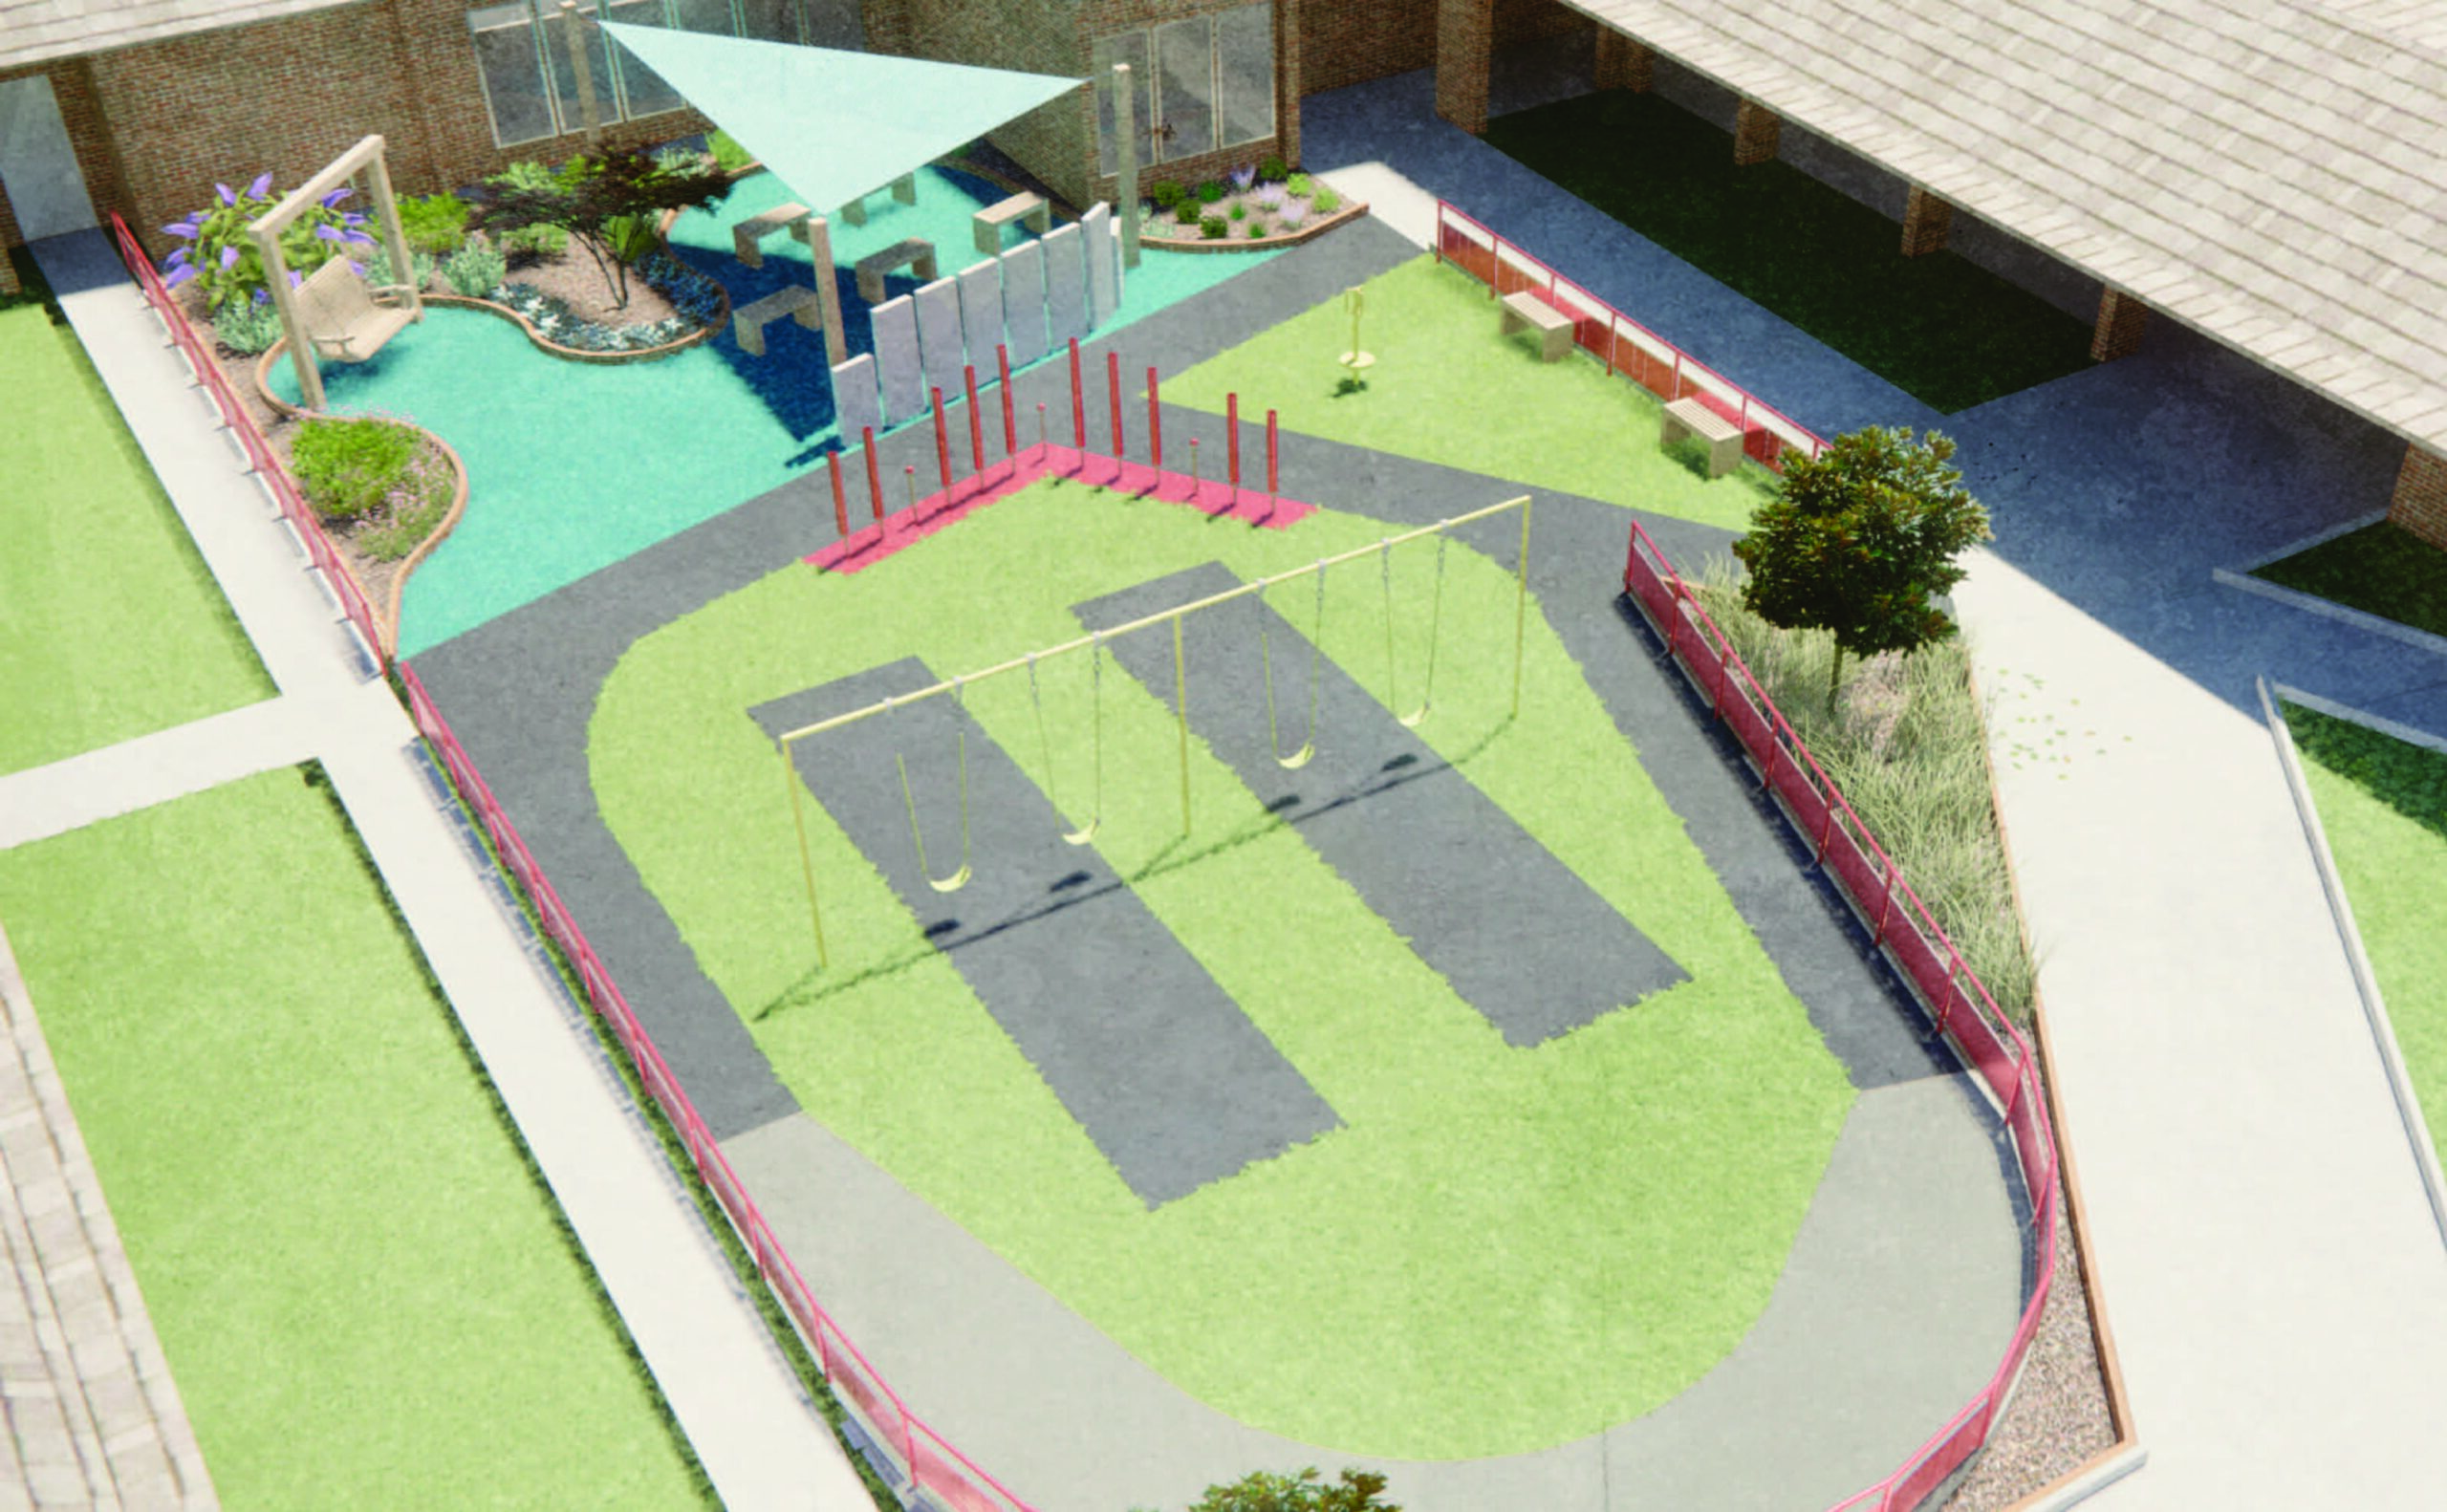 Freedom by Design rendering of the Governor Morehead School outdoor play area